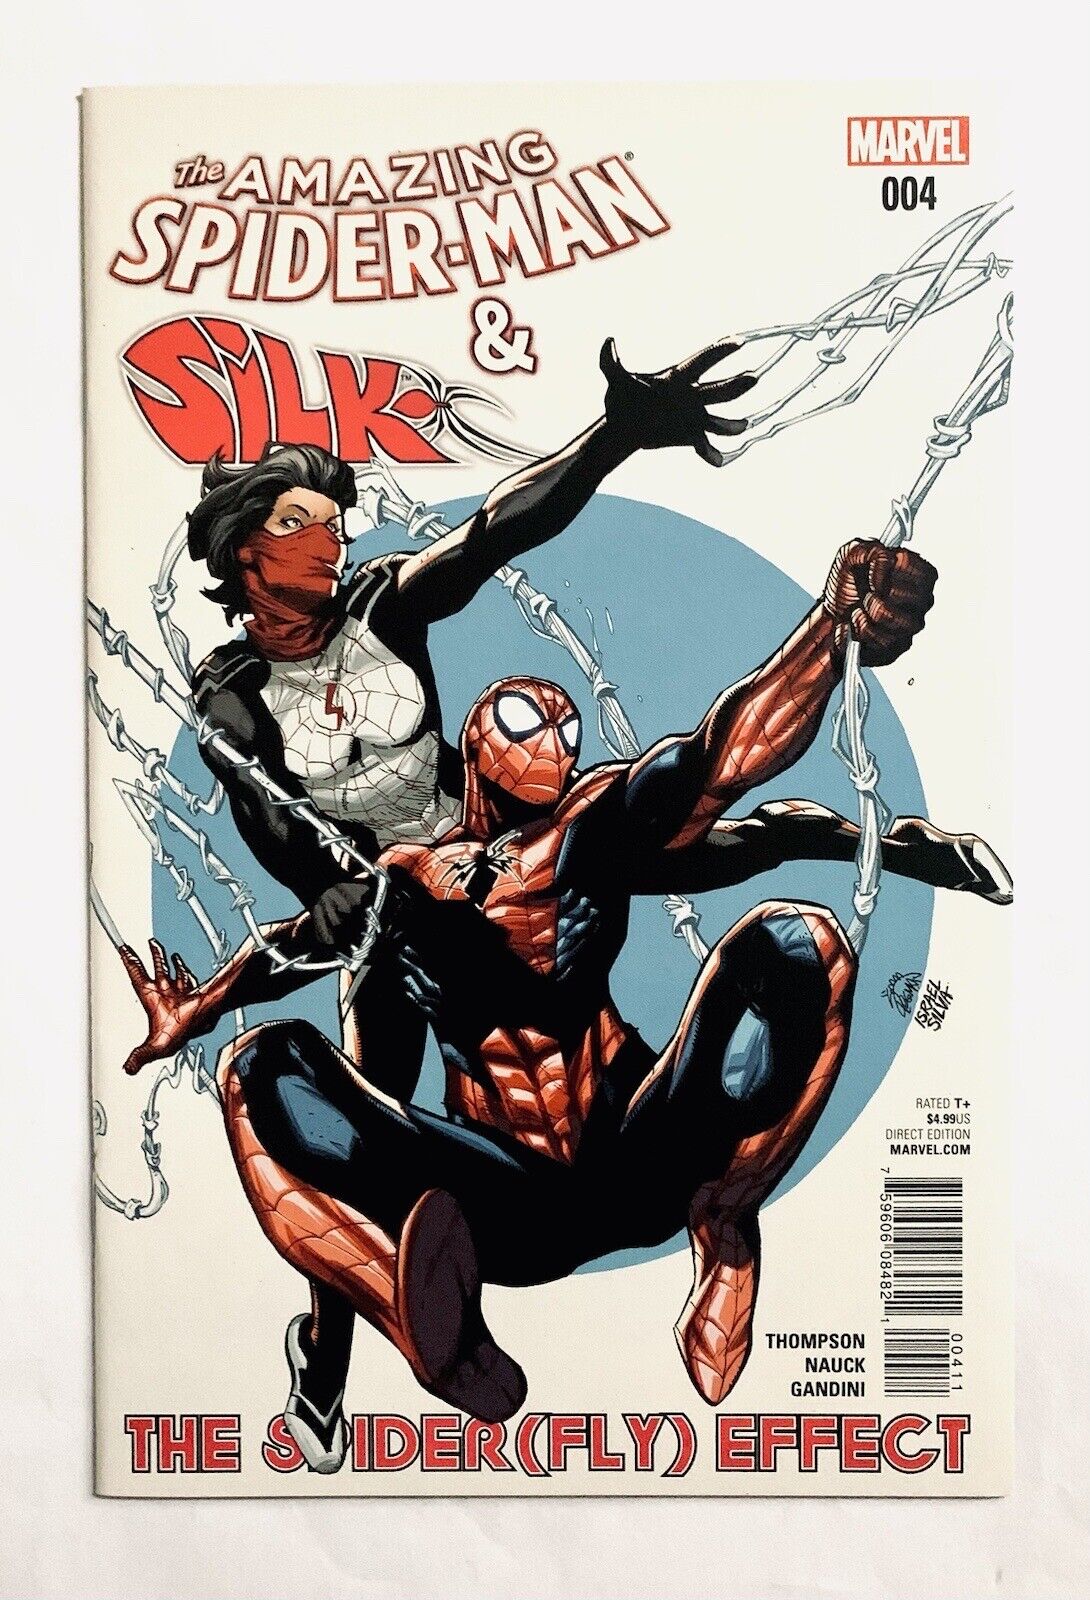 The Amazing Spider-Man & Silk: The Spider (fly) Effect #4 (2016) - Marvel Comics